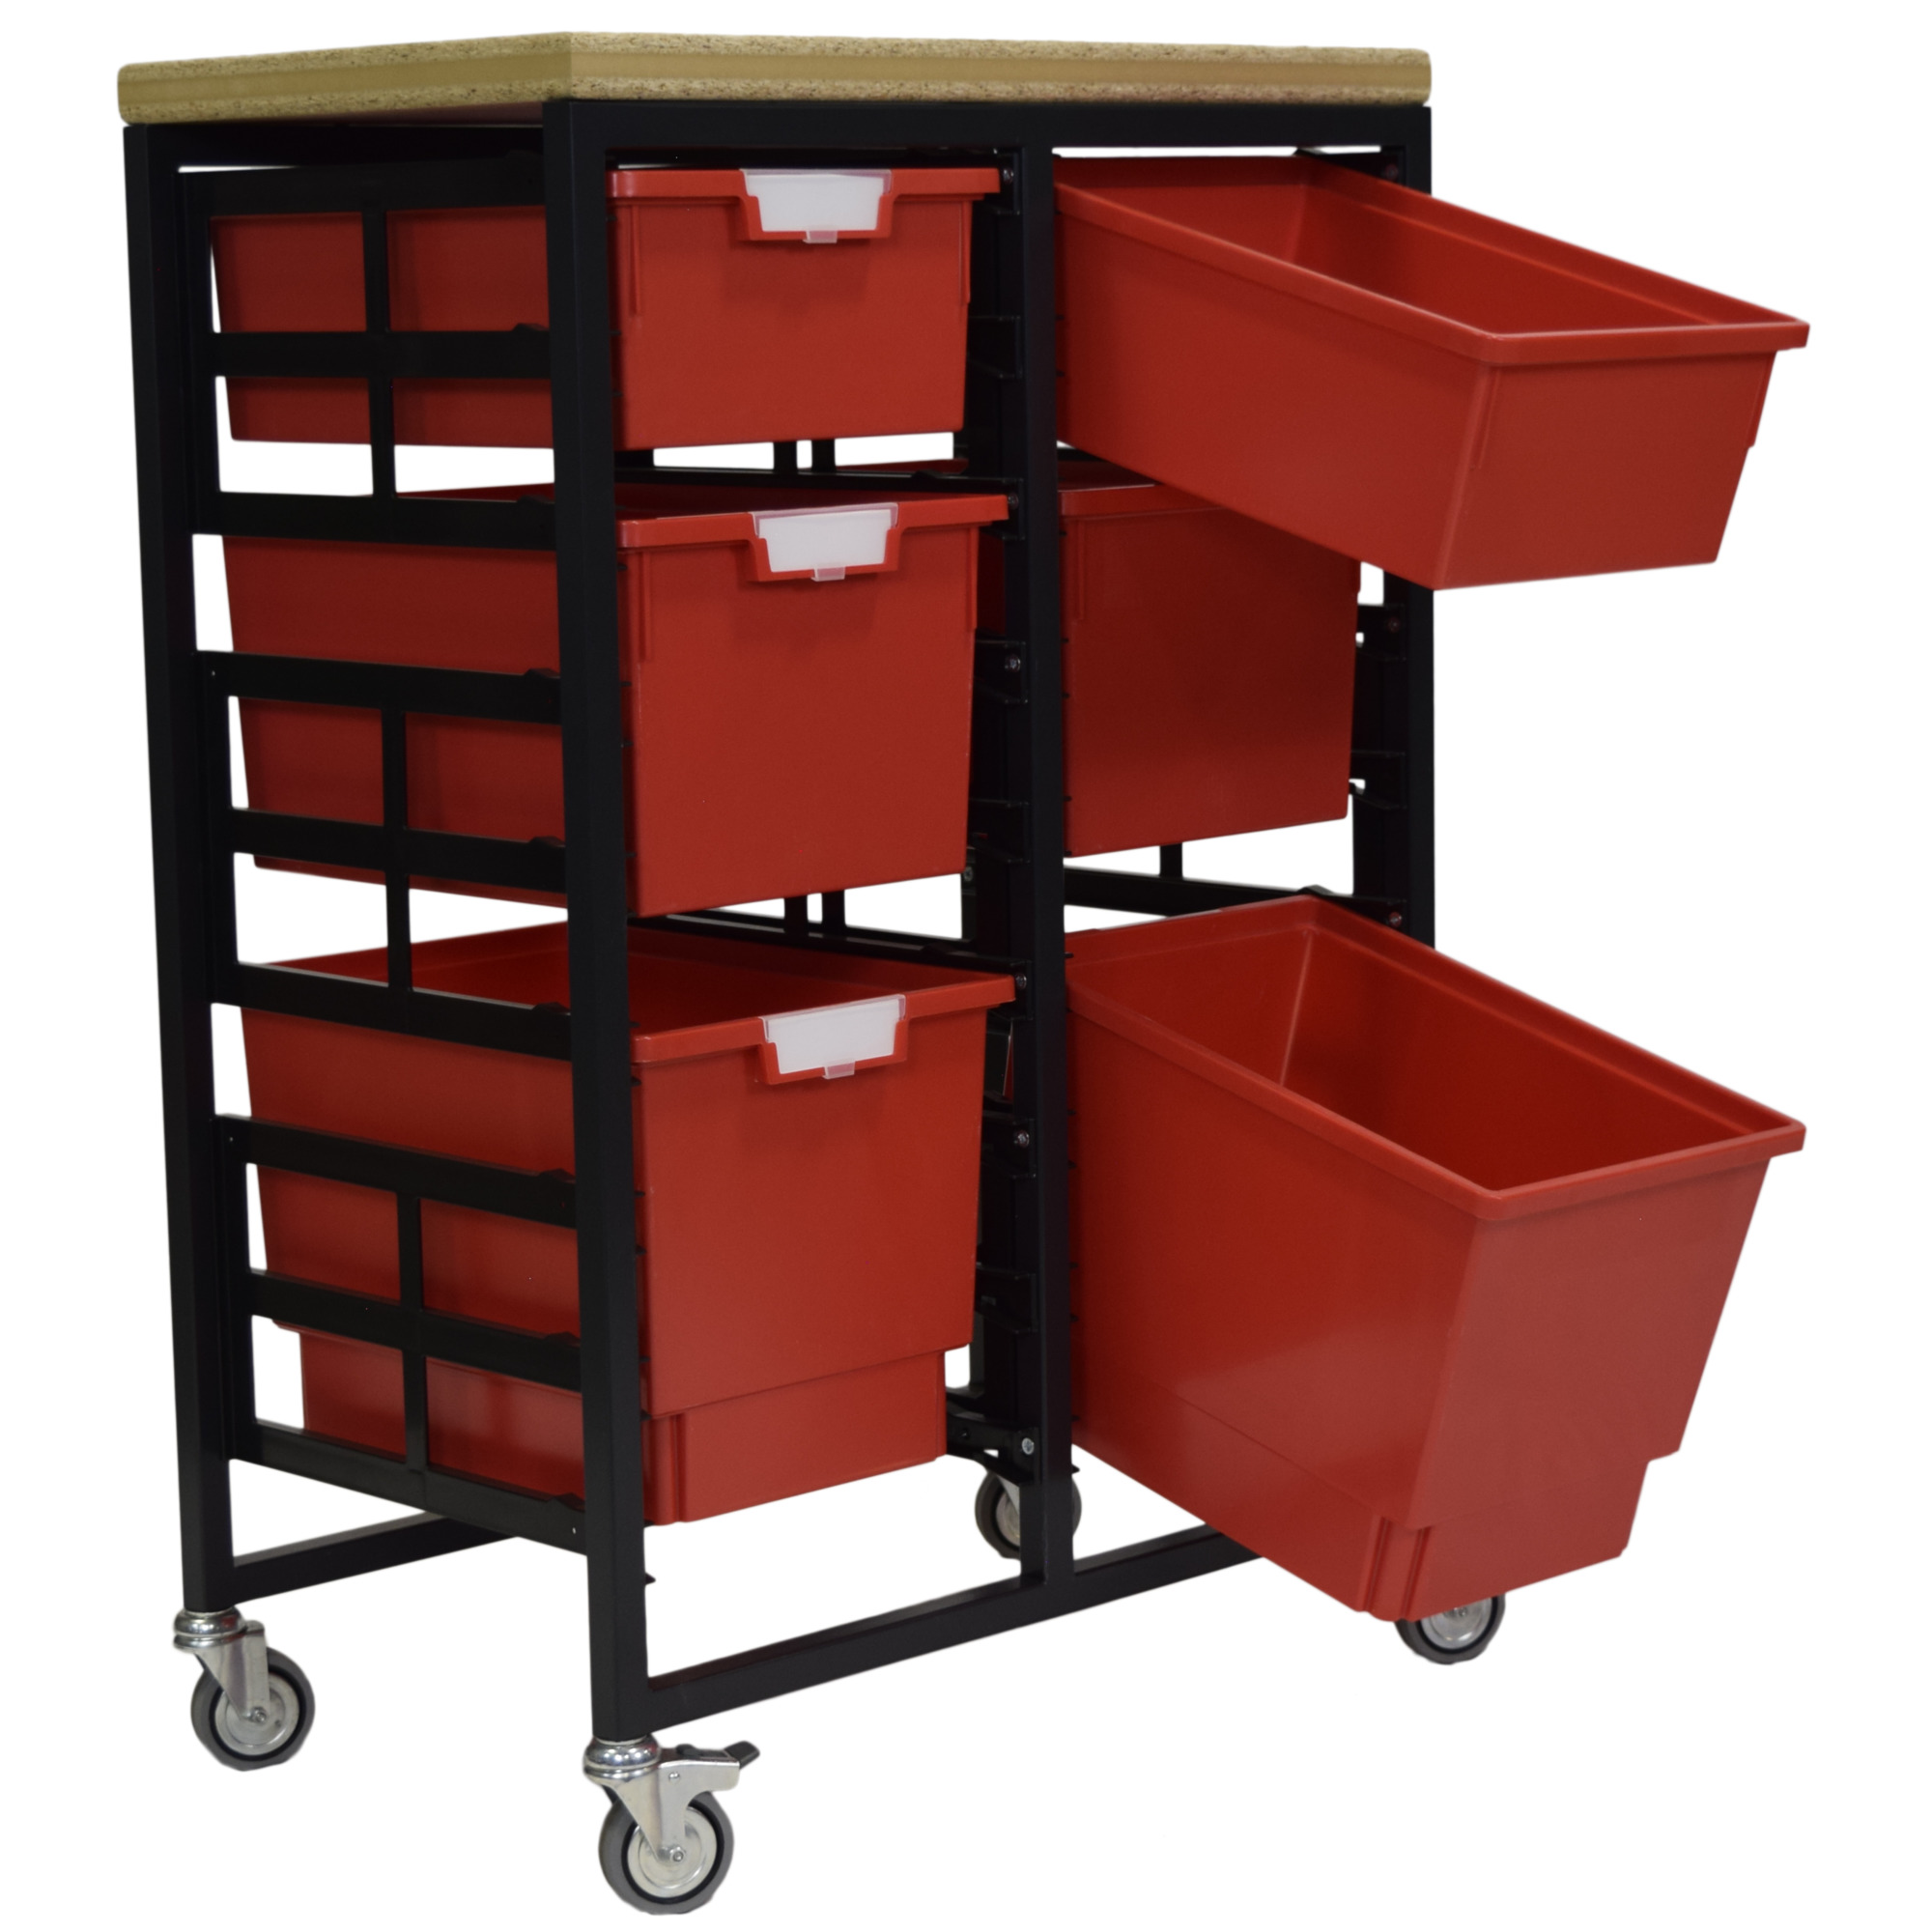 Certwood StorWerks, Mobile Work Station w/Wood Top -6 Trays-Red, Included (qty.) 6, Material Plastic, Height 12 in, Model CE2102DGGC-2D2T2QPR